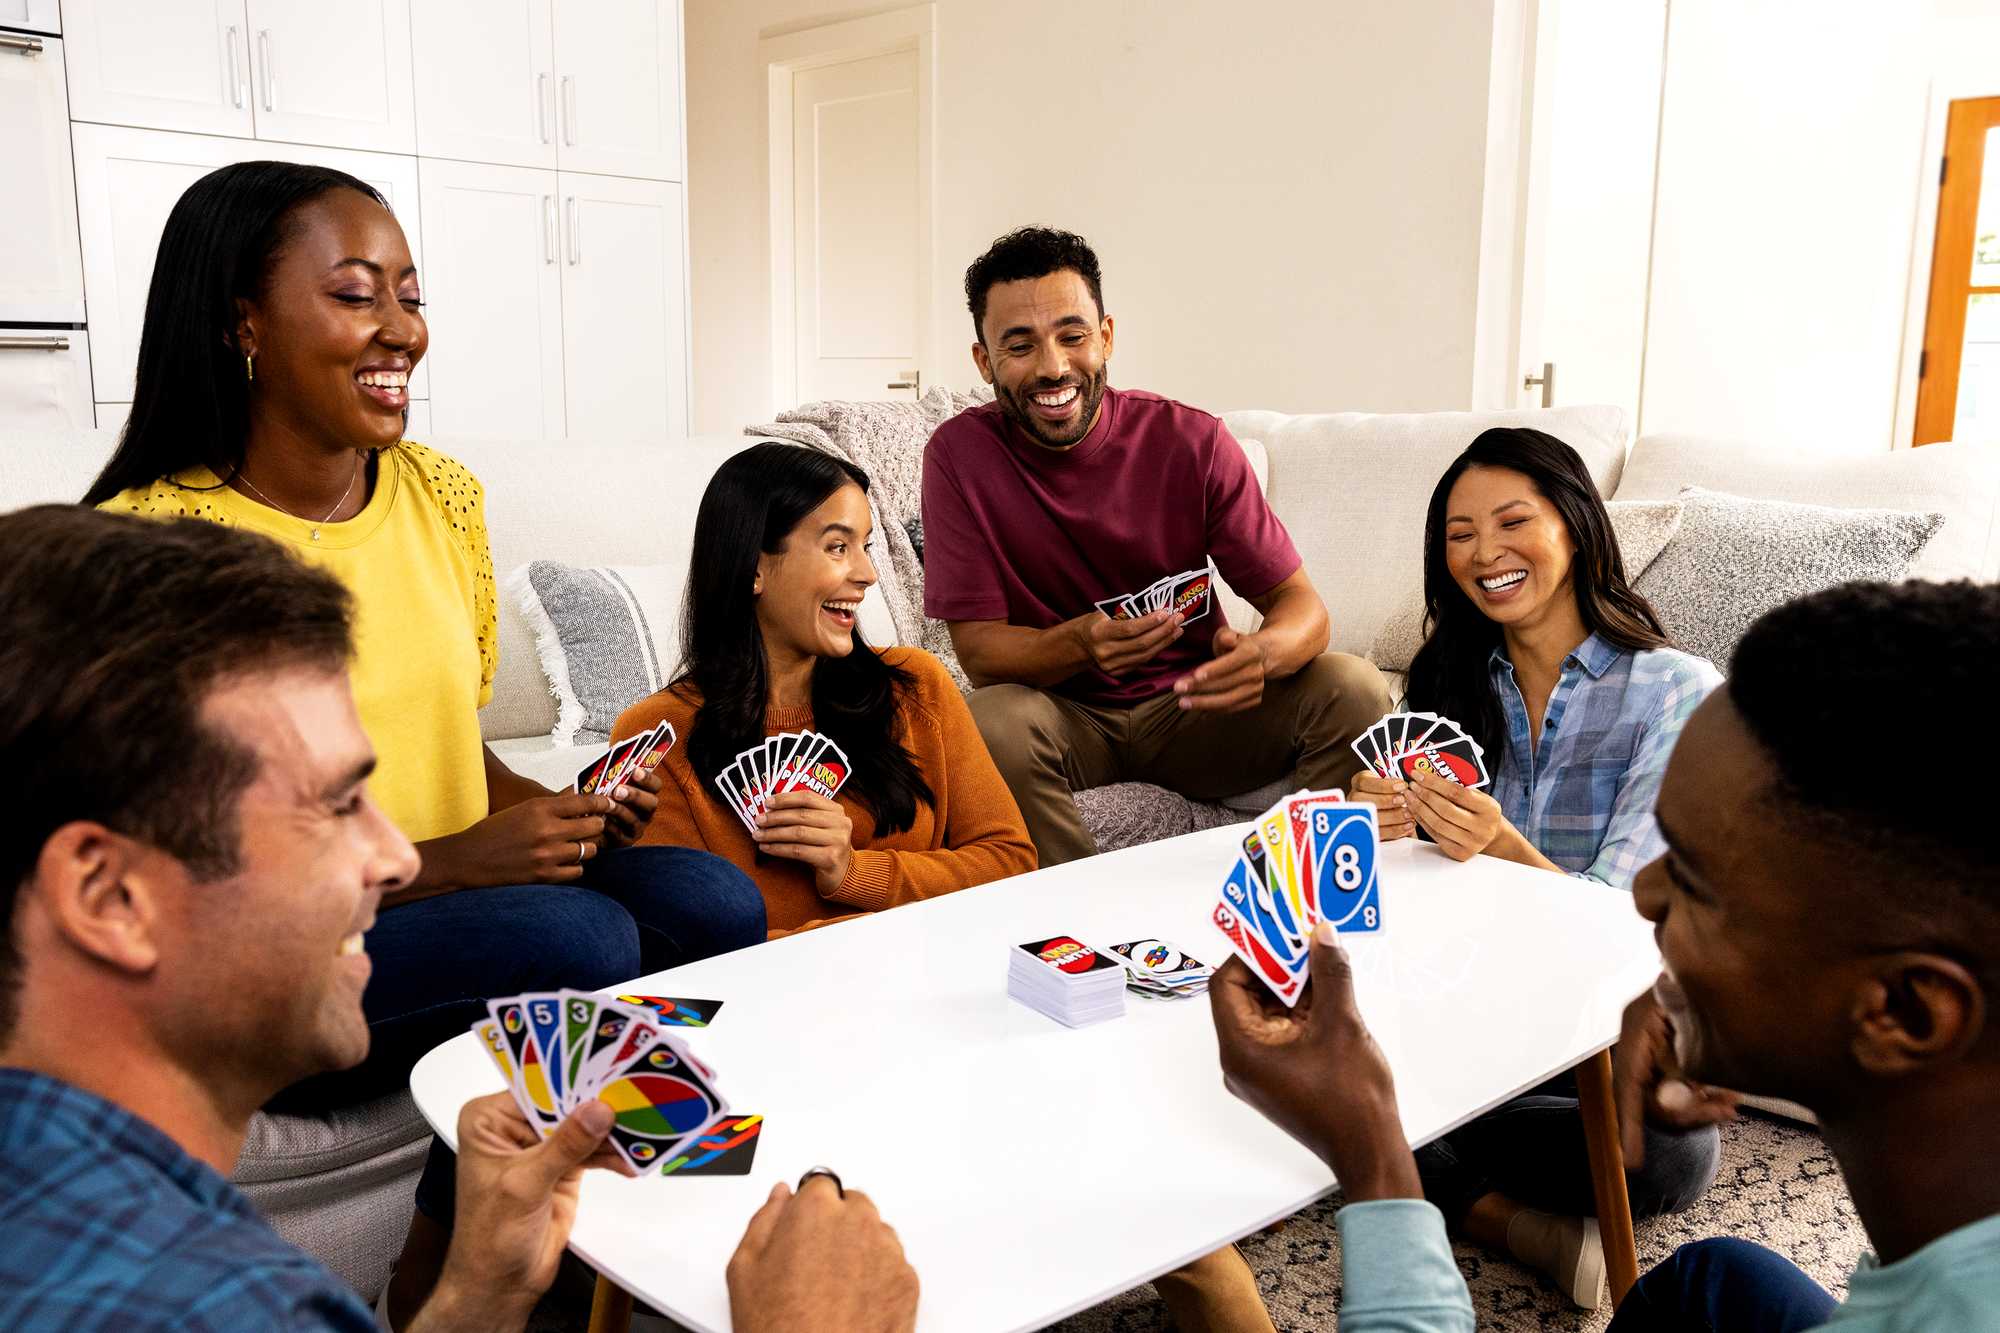 UNO Party in play at group gathering